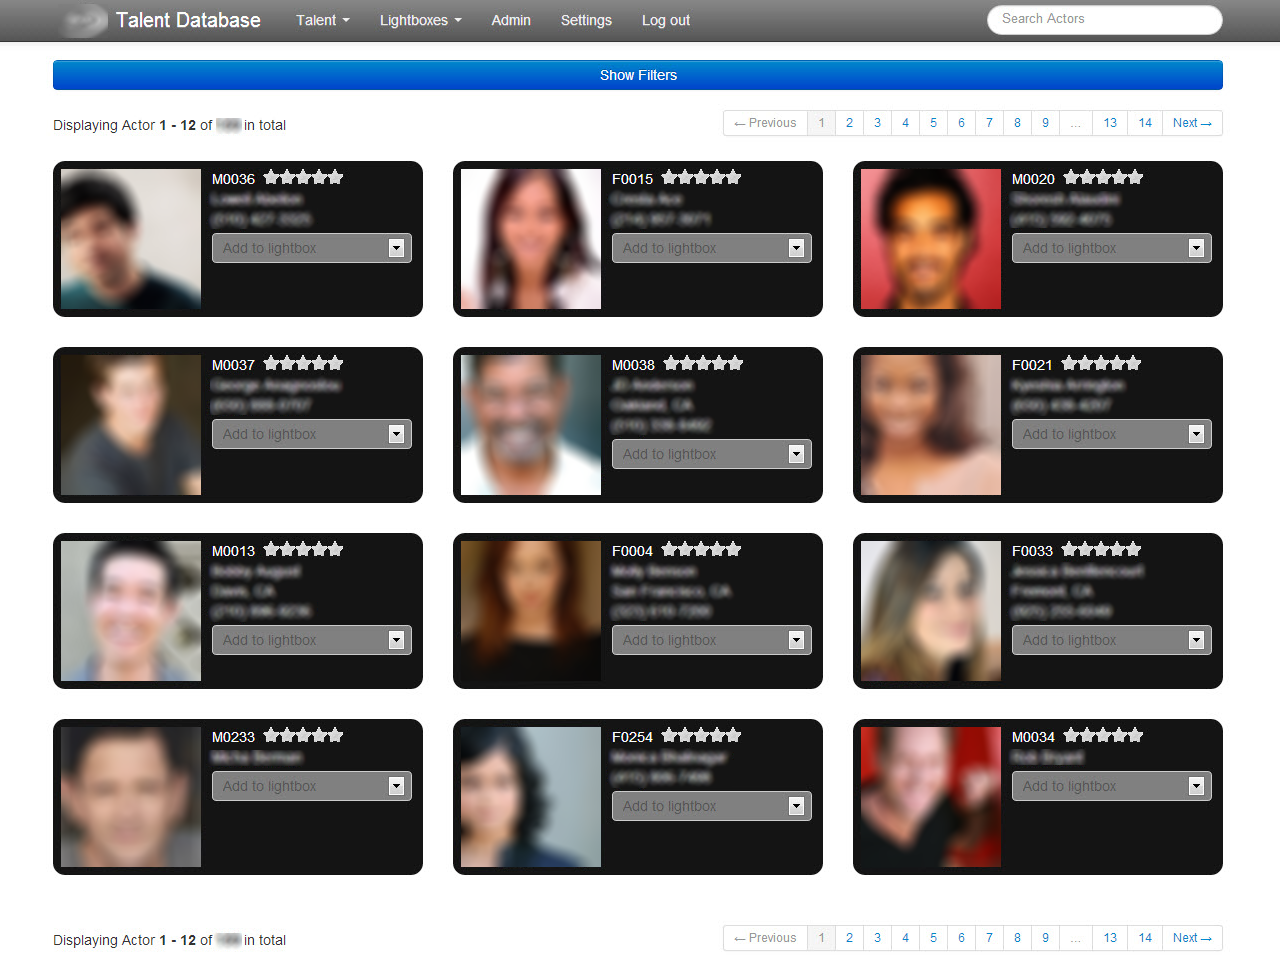 Talent database grid view